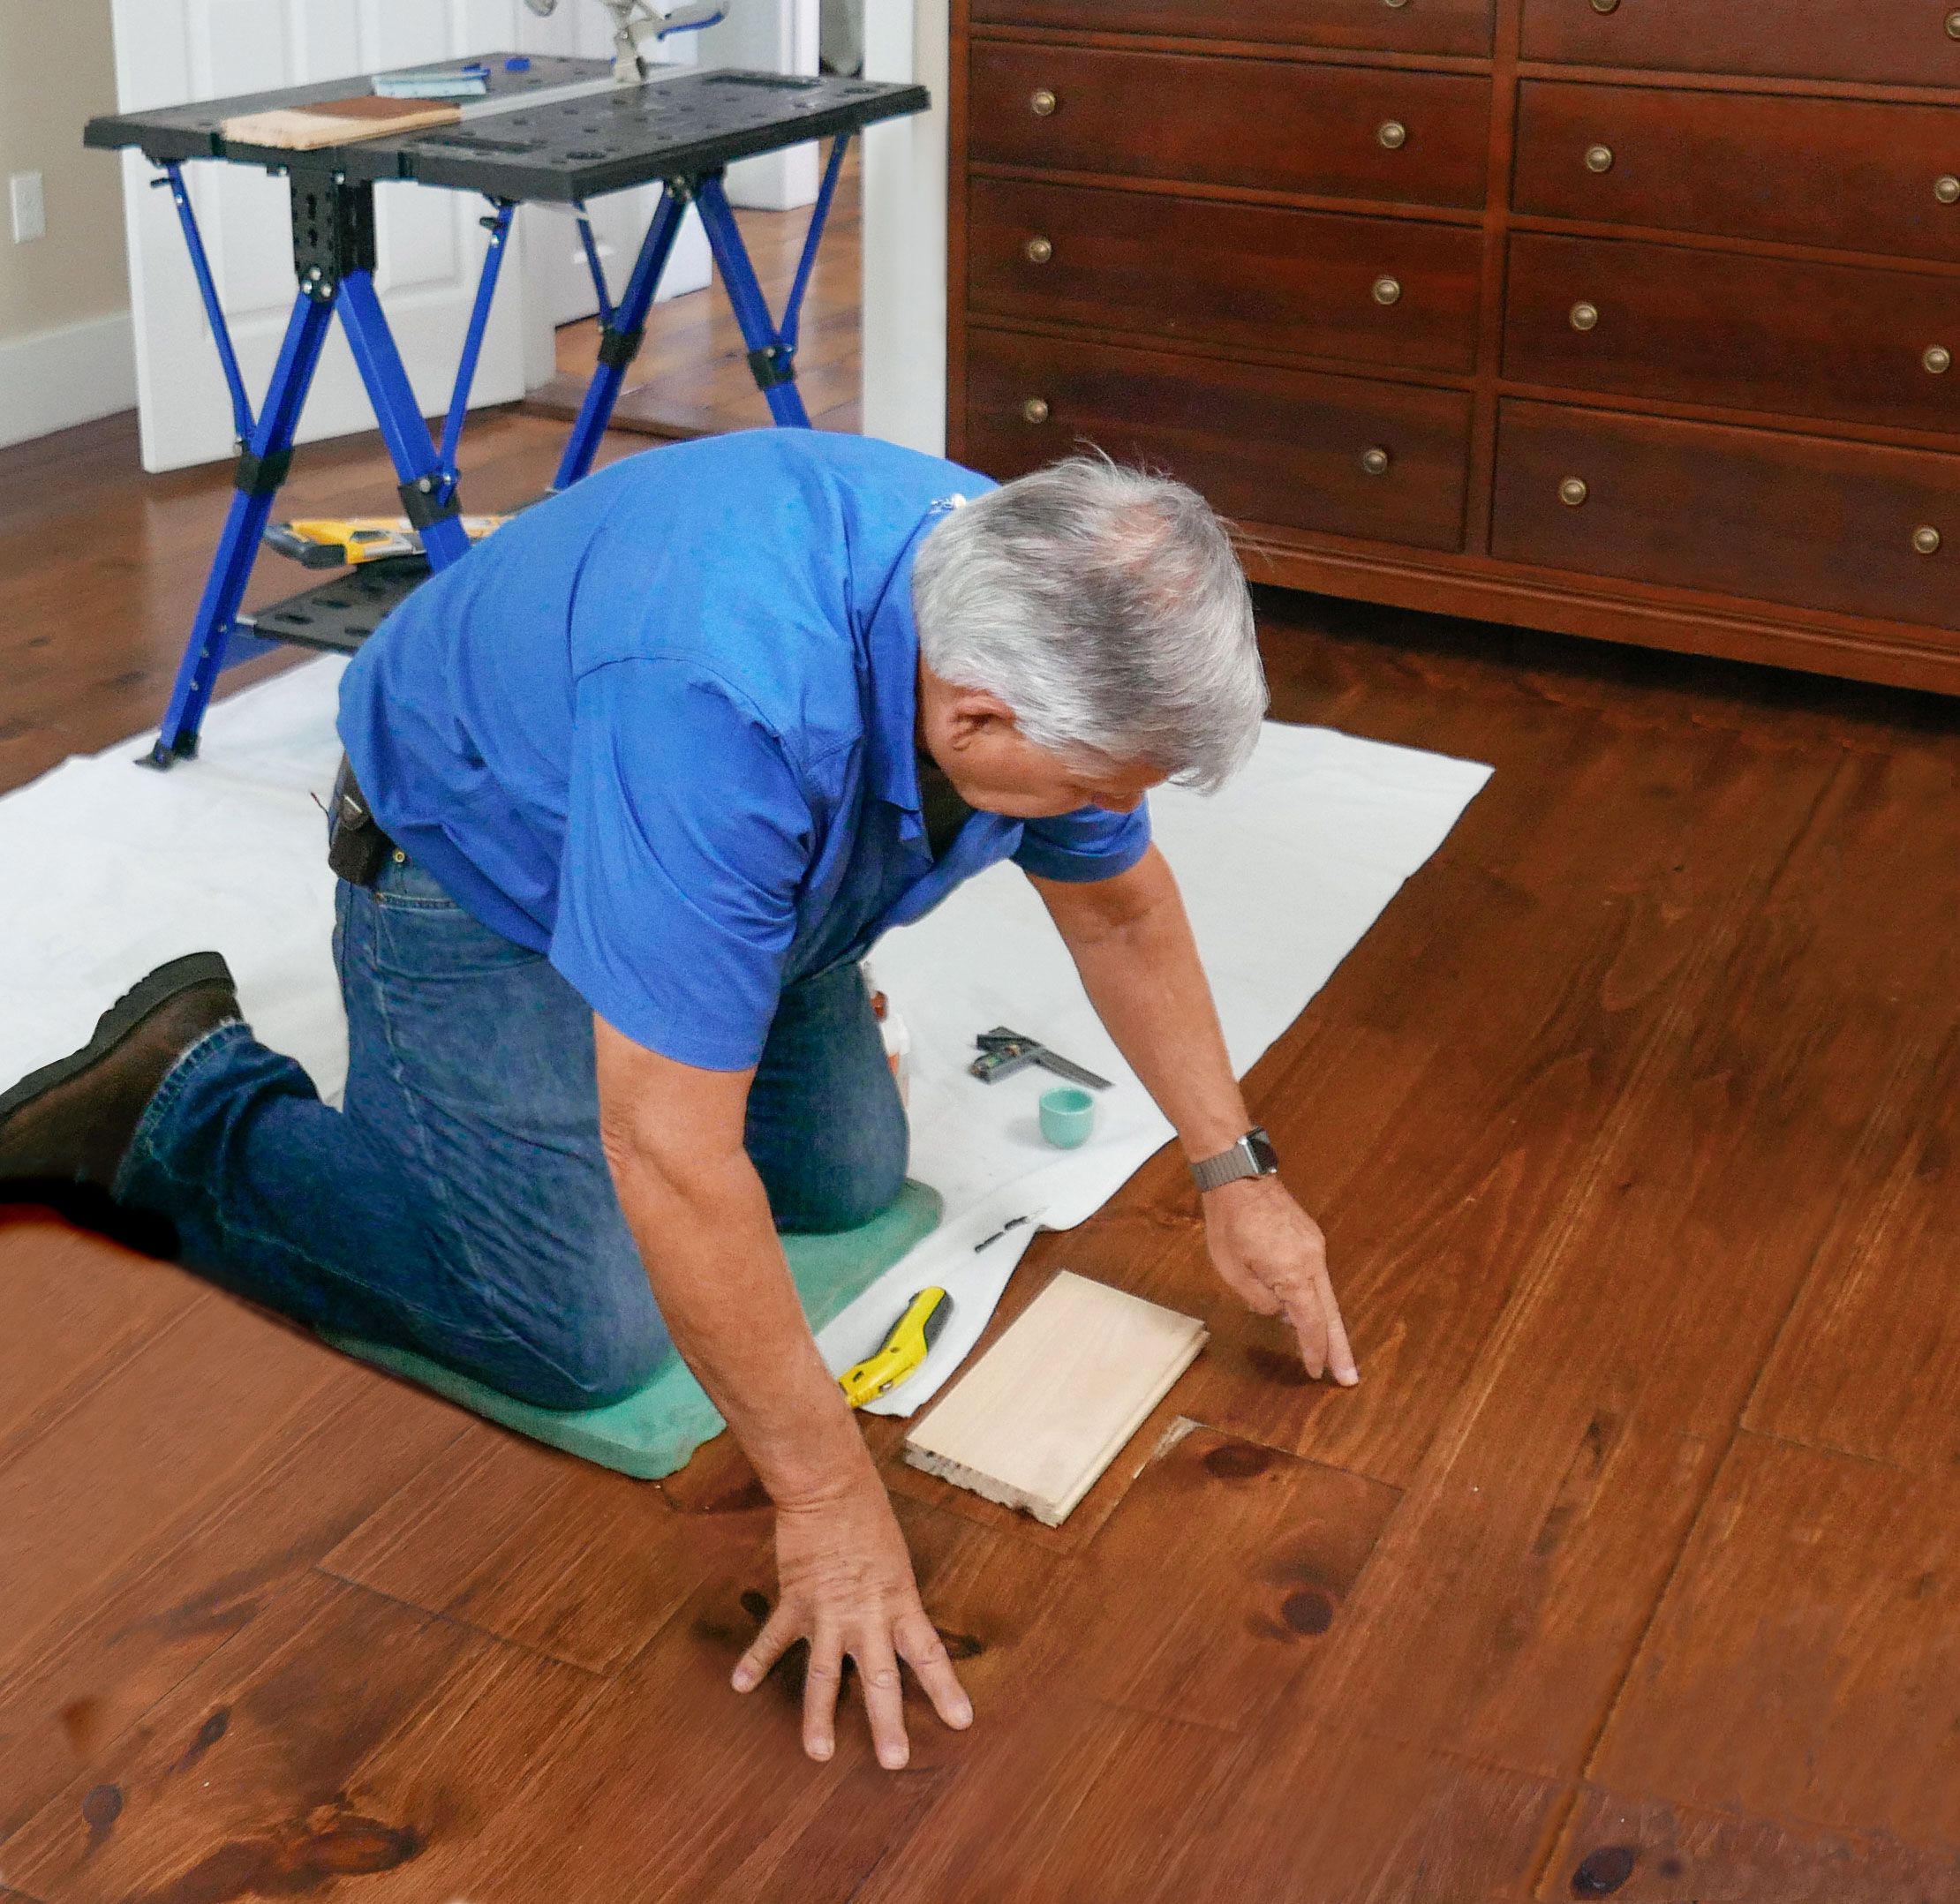 Five Ways to Fake Wood Flooring - My Four and More